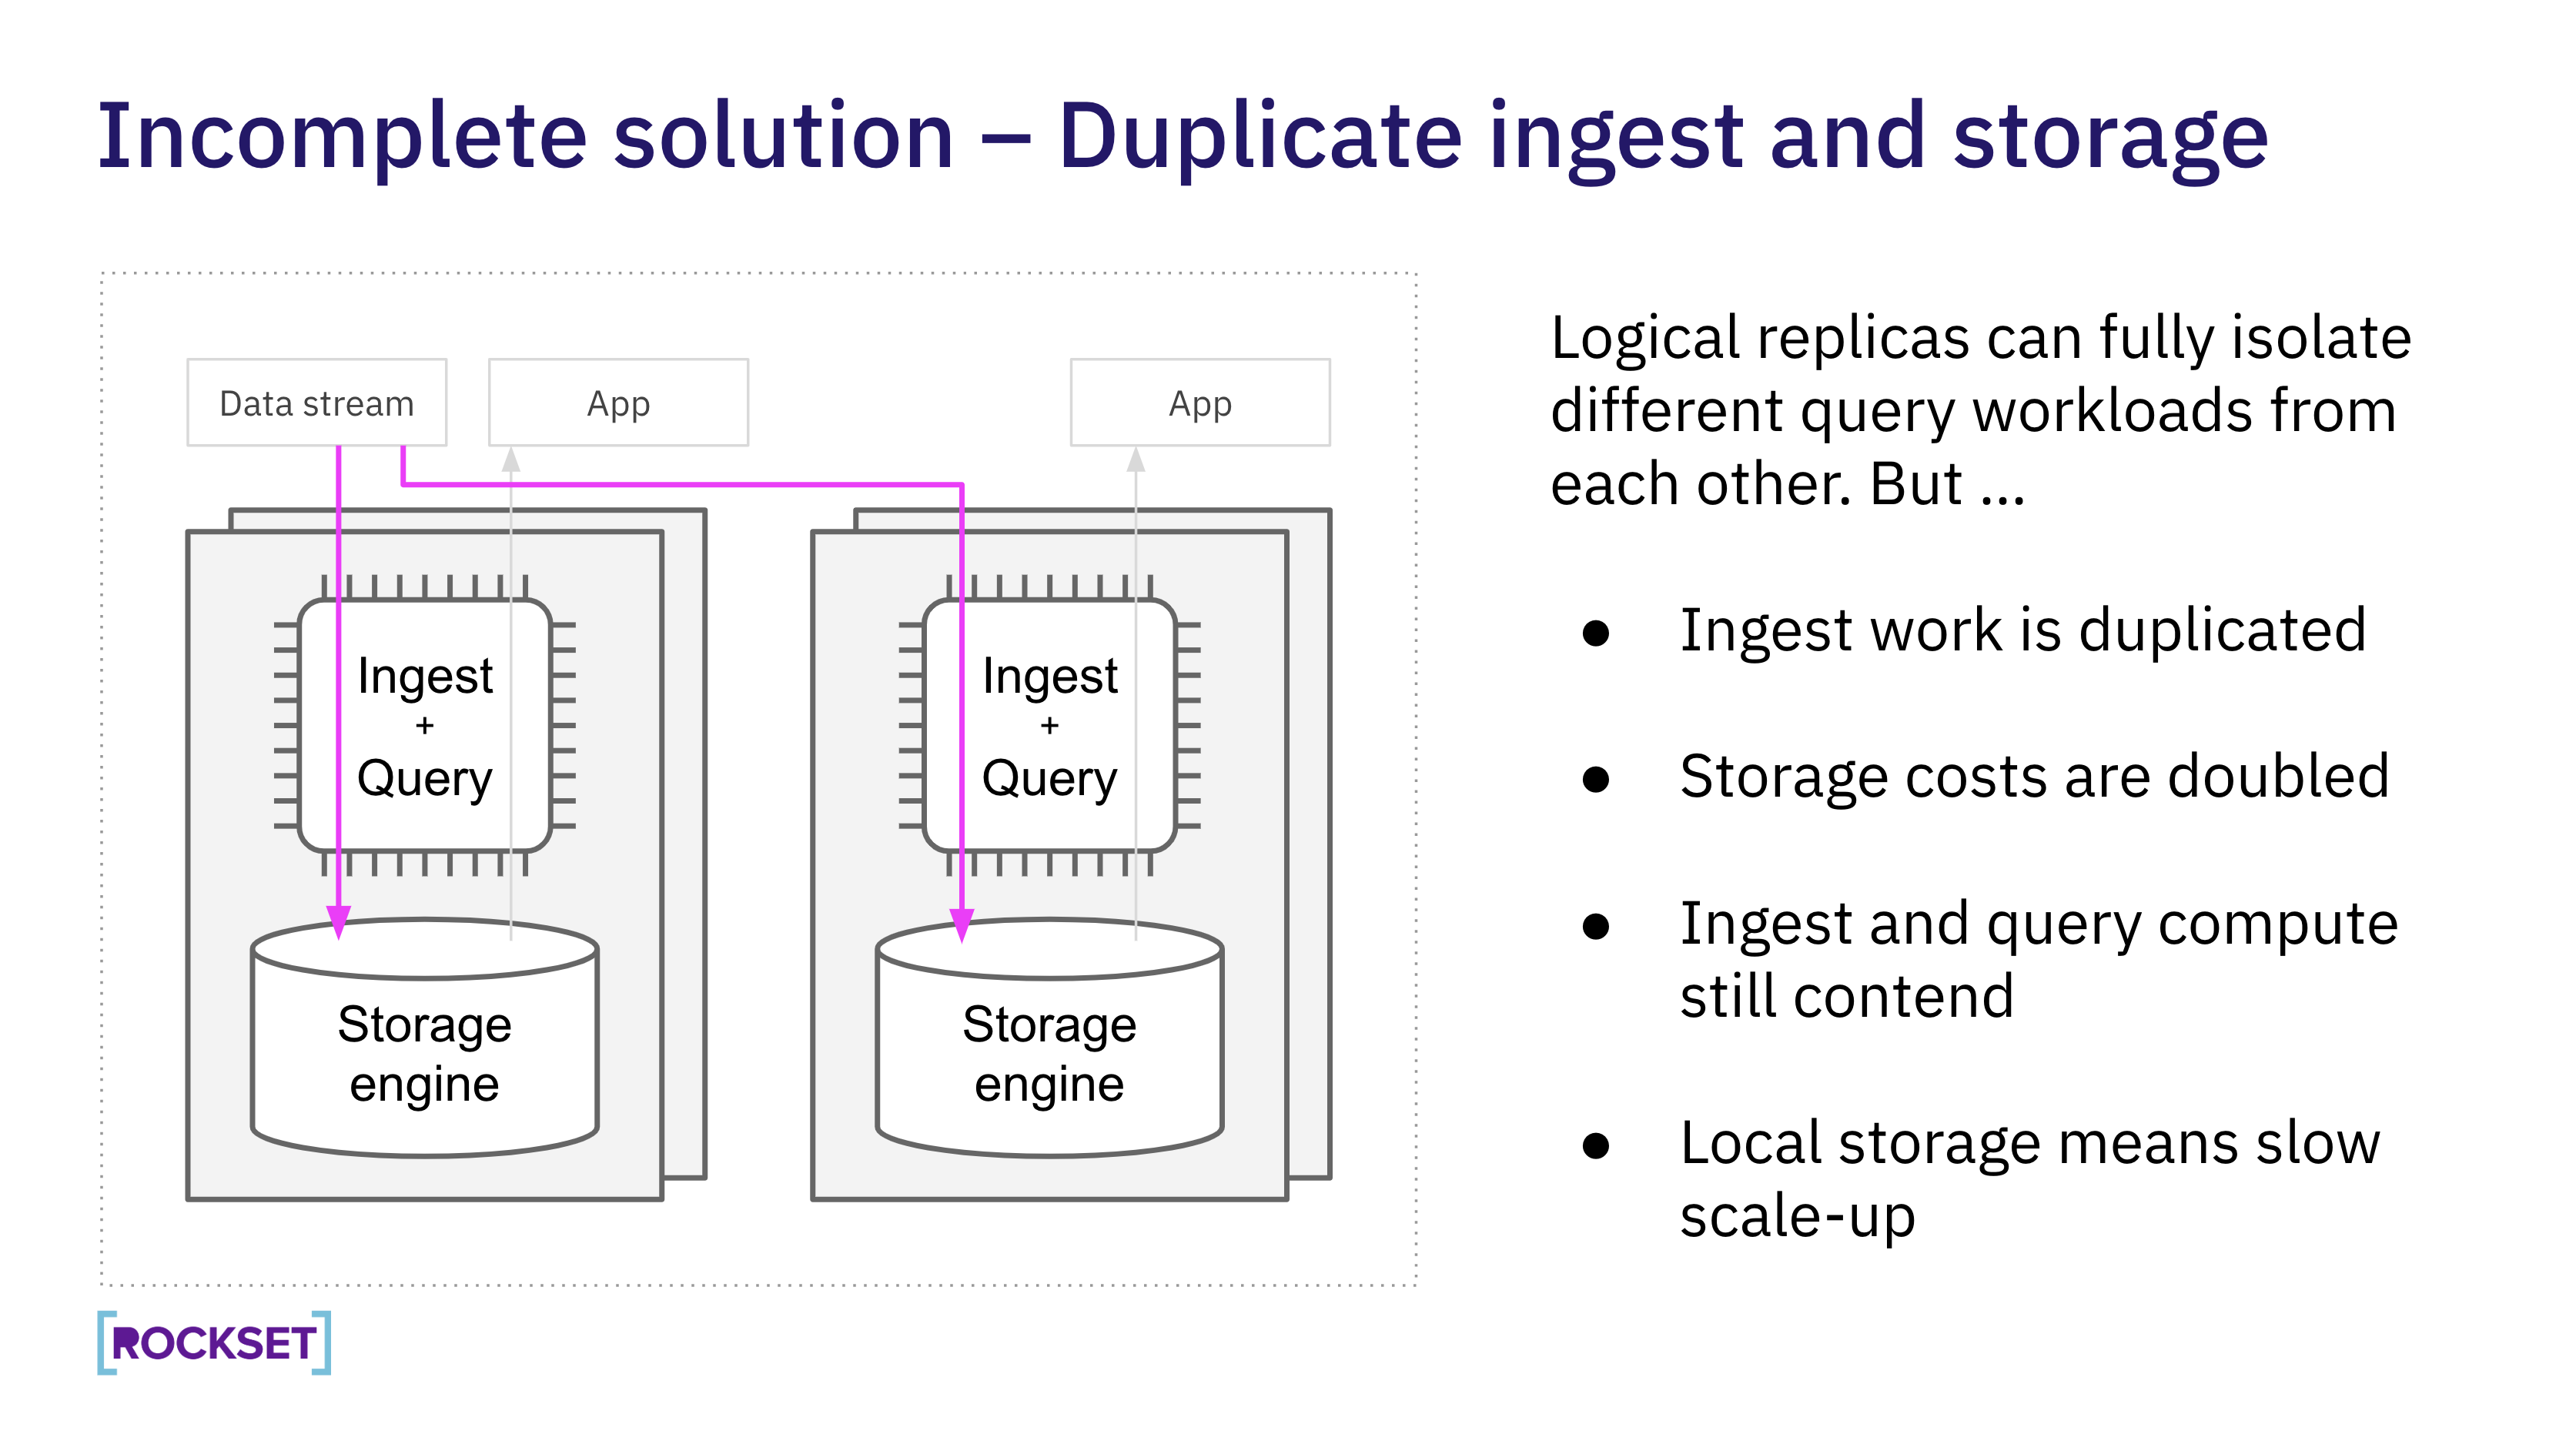 Incomplete solution- Duplicate ingest and storage